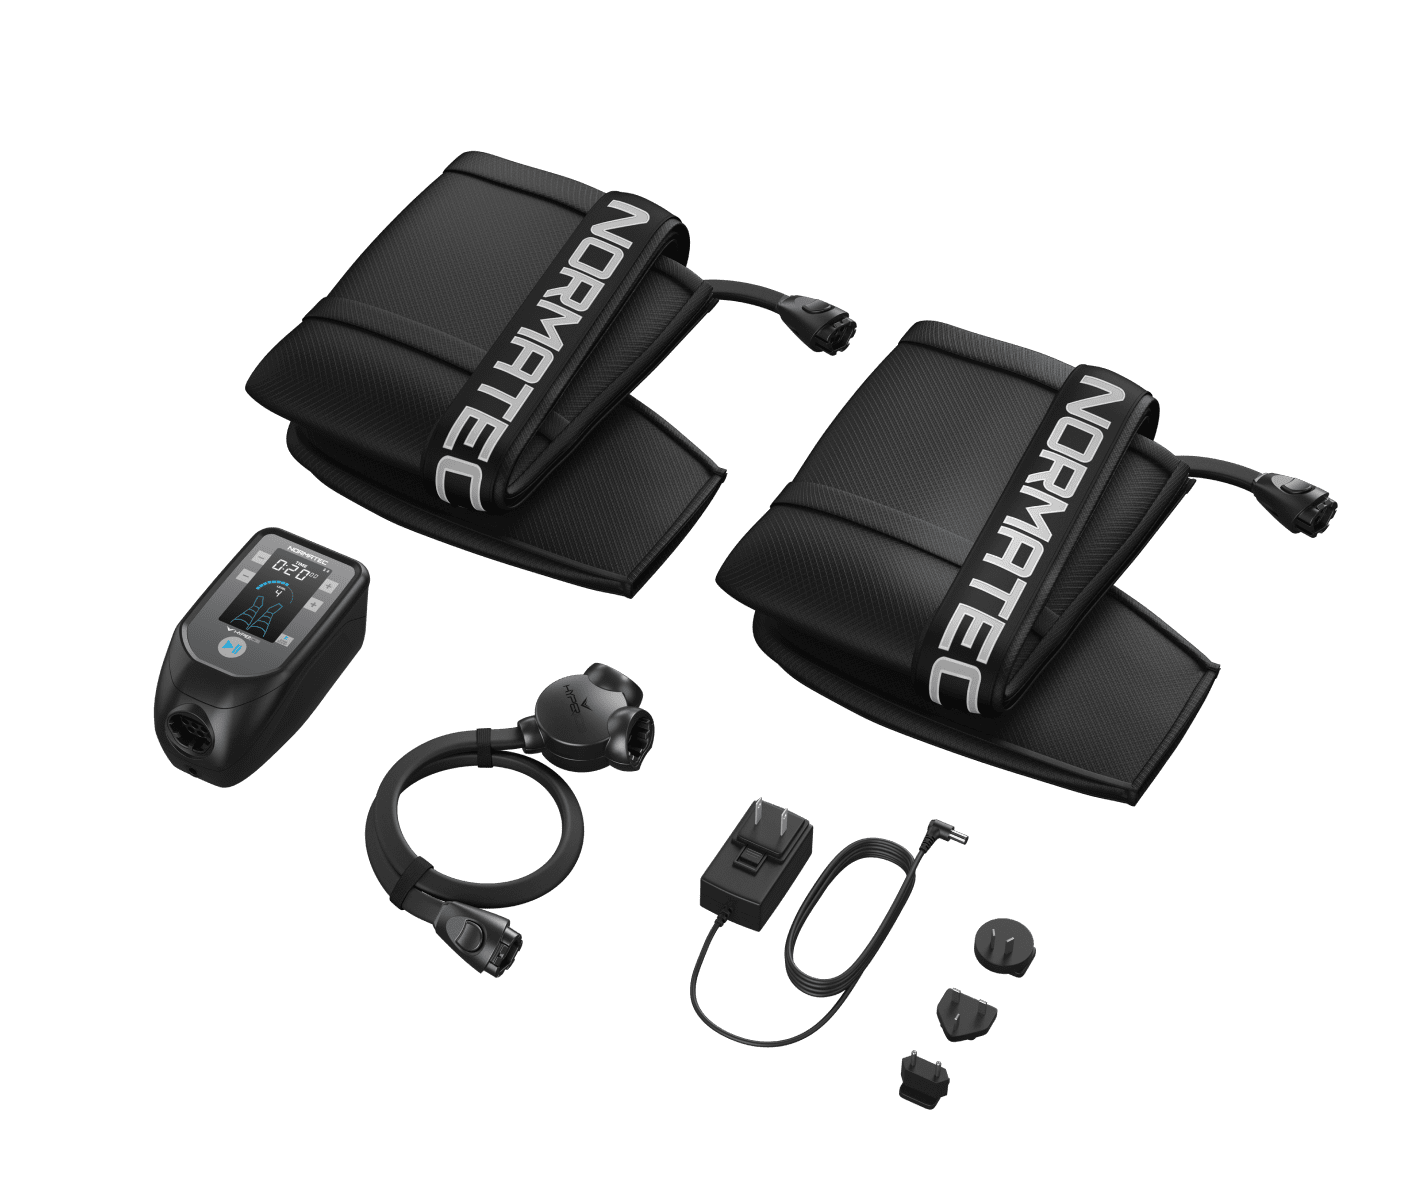 What’s included with your Normatec 2.0 Legs